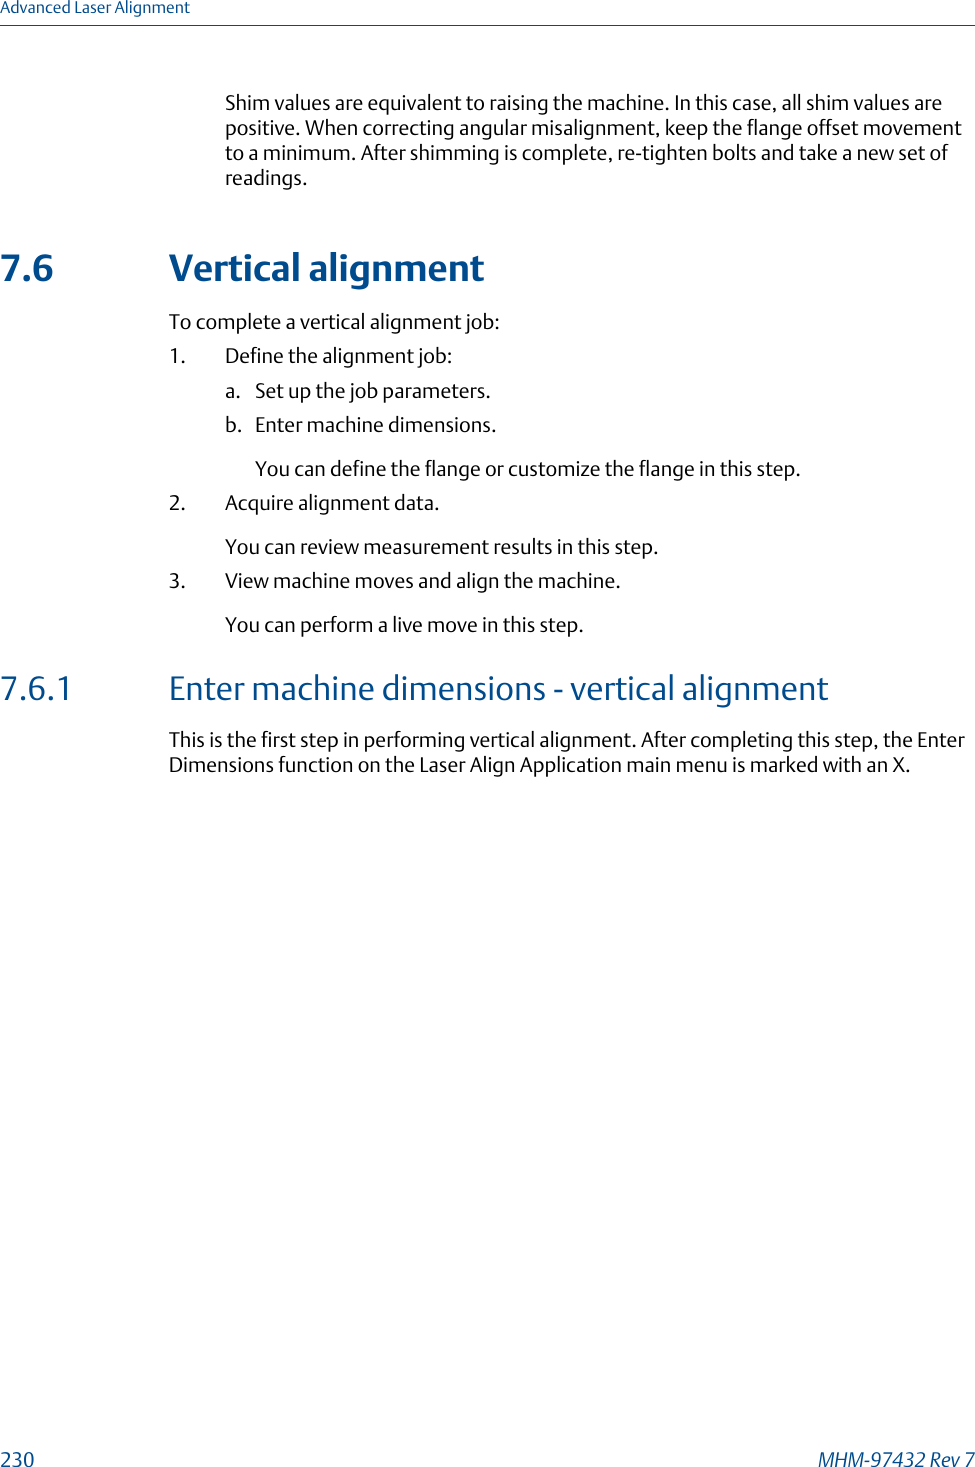 Shim values are equivalent to raising the machine. In this case, all shim values arepositive. When correcting angular misalignment, keep the flange offset movementto a minimum. After shimming is complete, re-tighten bolts and take a new set ofreadings.7.6 Vertical alignmentTo complete a vertical alignment job:1. Define the alignment job:a. Set up the job parameters.b. Enter machine dimensions.You can define the flange or customize the flange in this step.2. Acquire alignment data.You can review measurement results in this step.3. View machine moves and align the machine.You can perform a live move in this step.7.6.1 Enter machine dimensions - vertical alignmentThis is the first step in performing vertical alignment. After completing this step, the EnterDimensions function on the Laser Align Application main menu is marked with an X.Advanced Laser Alignment230 MHM-97432 Rev 7